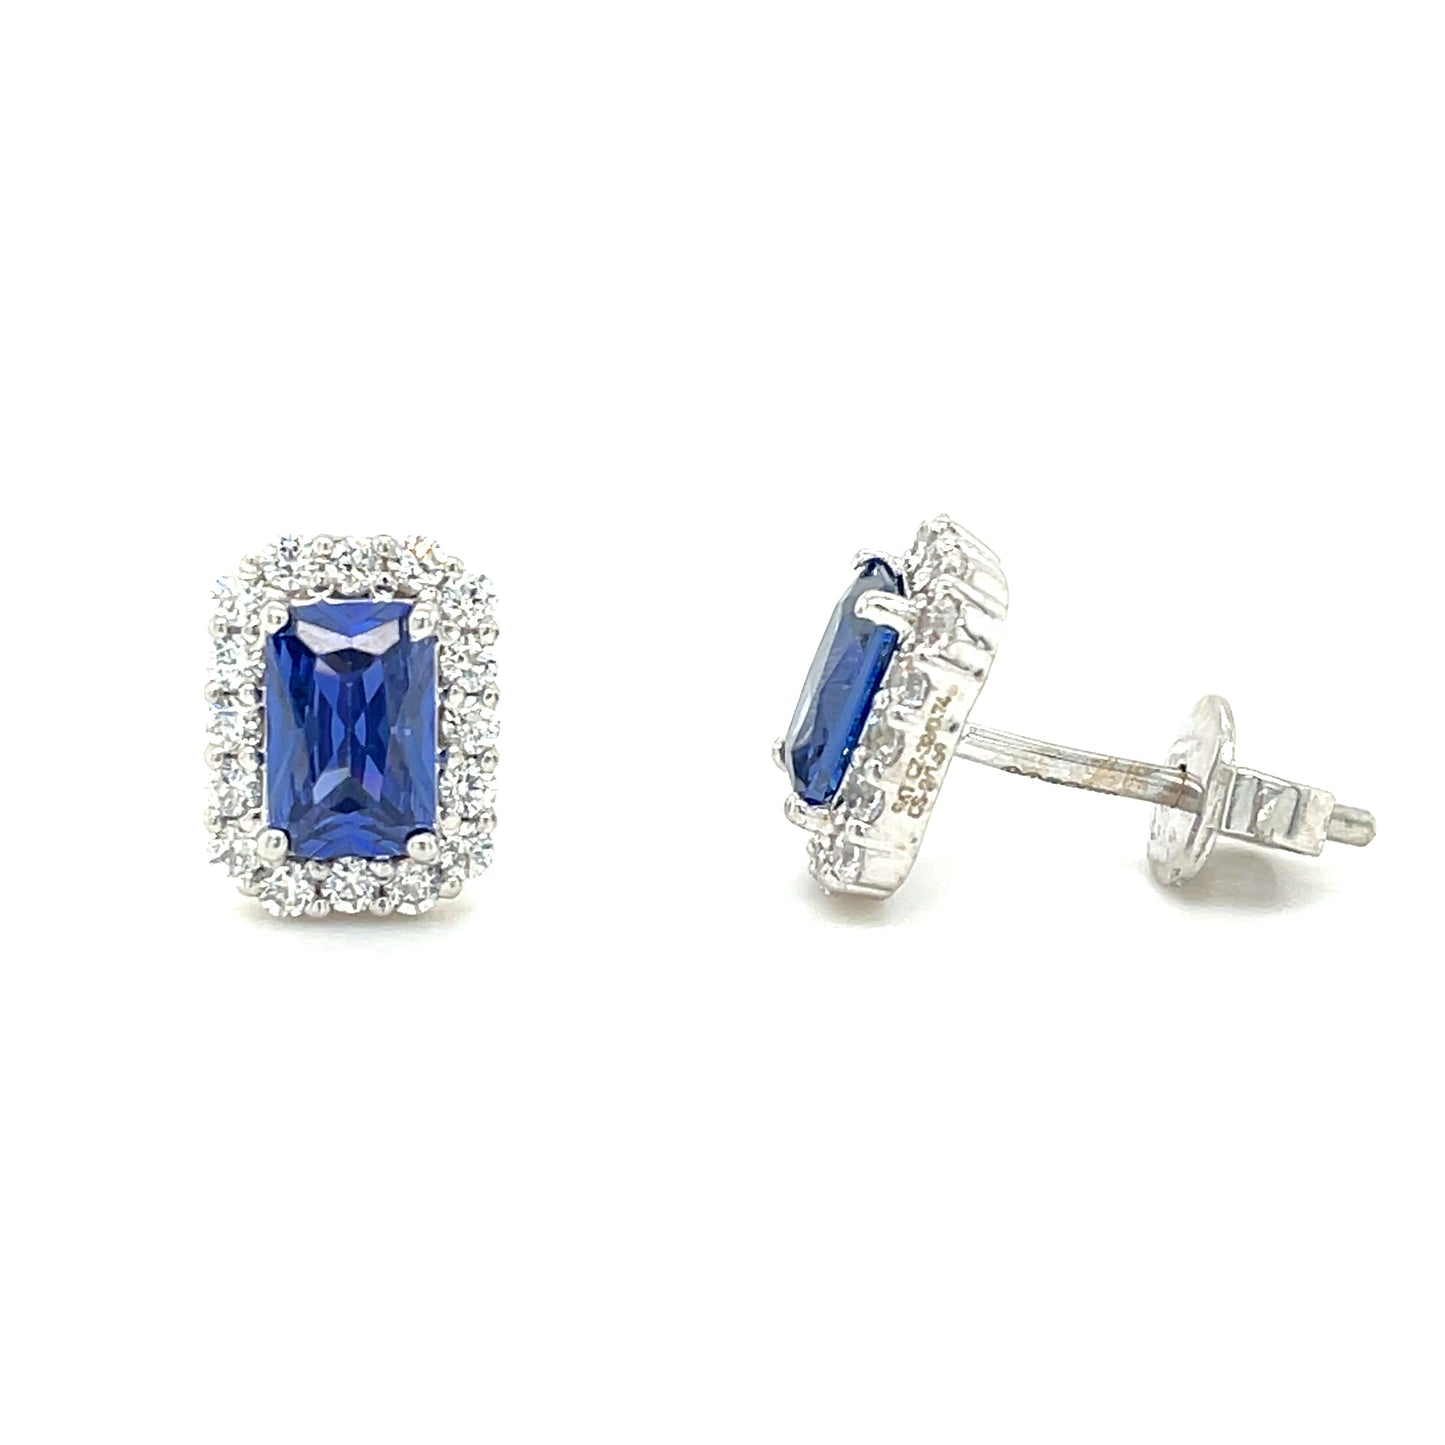 9CT White Gold Emerald Cut Halo Cubic Zirconia and Blue Stone Stud Earring